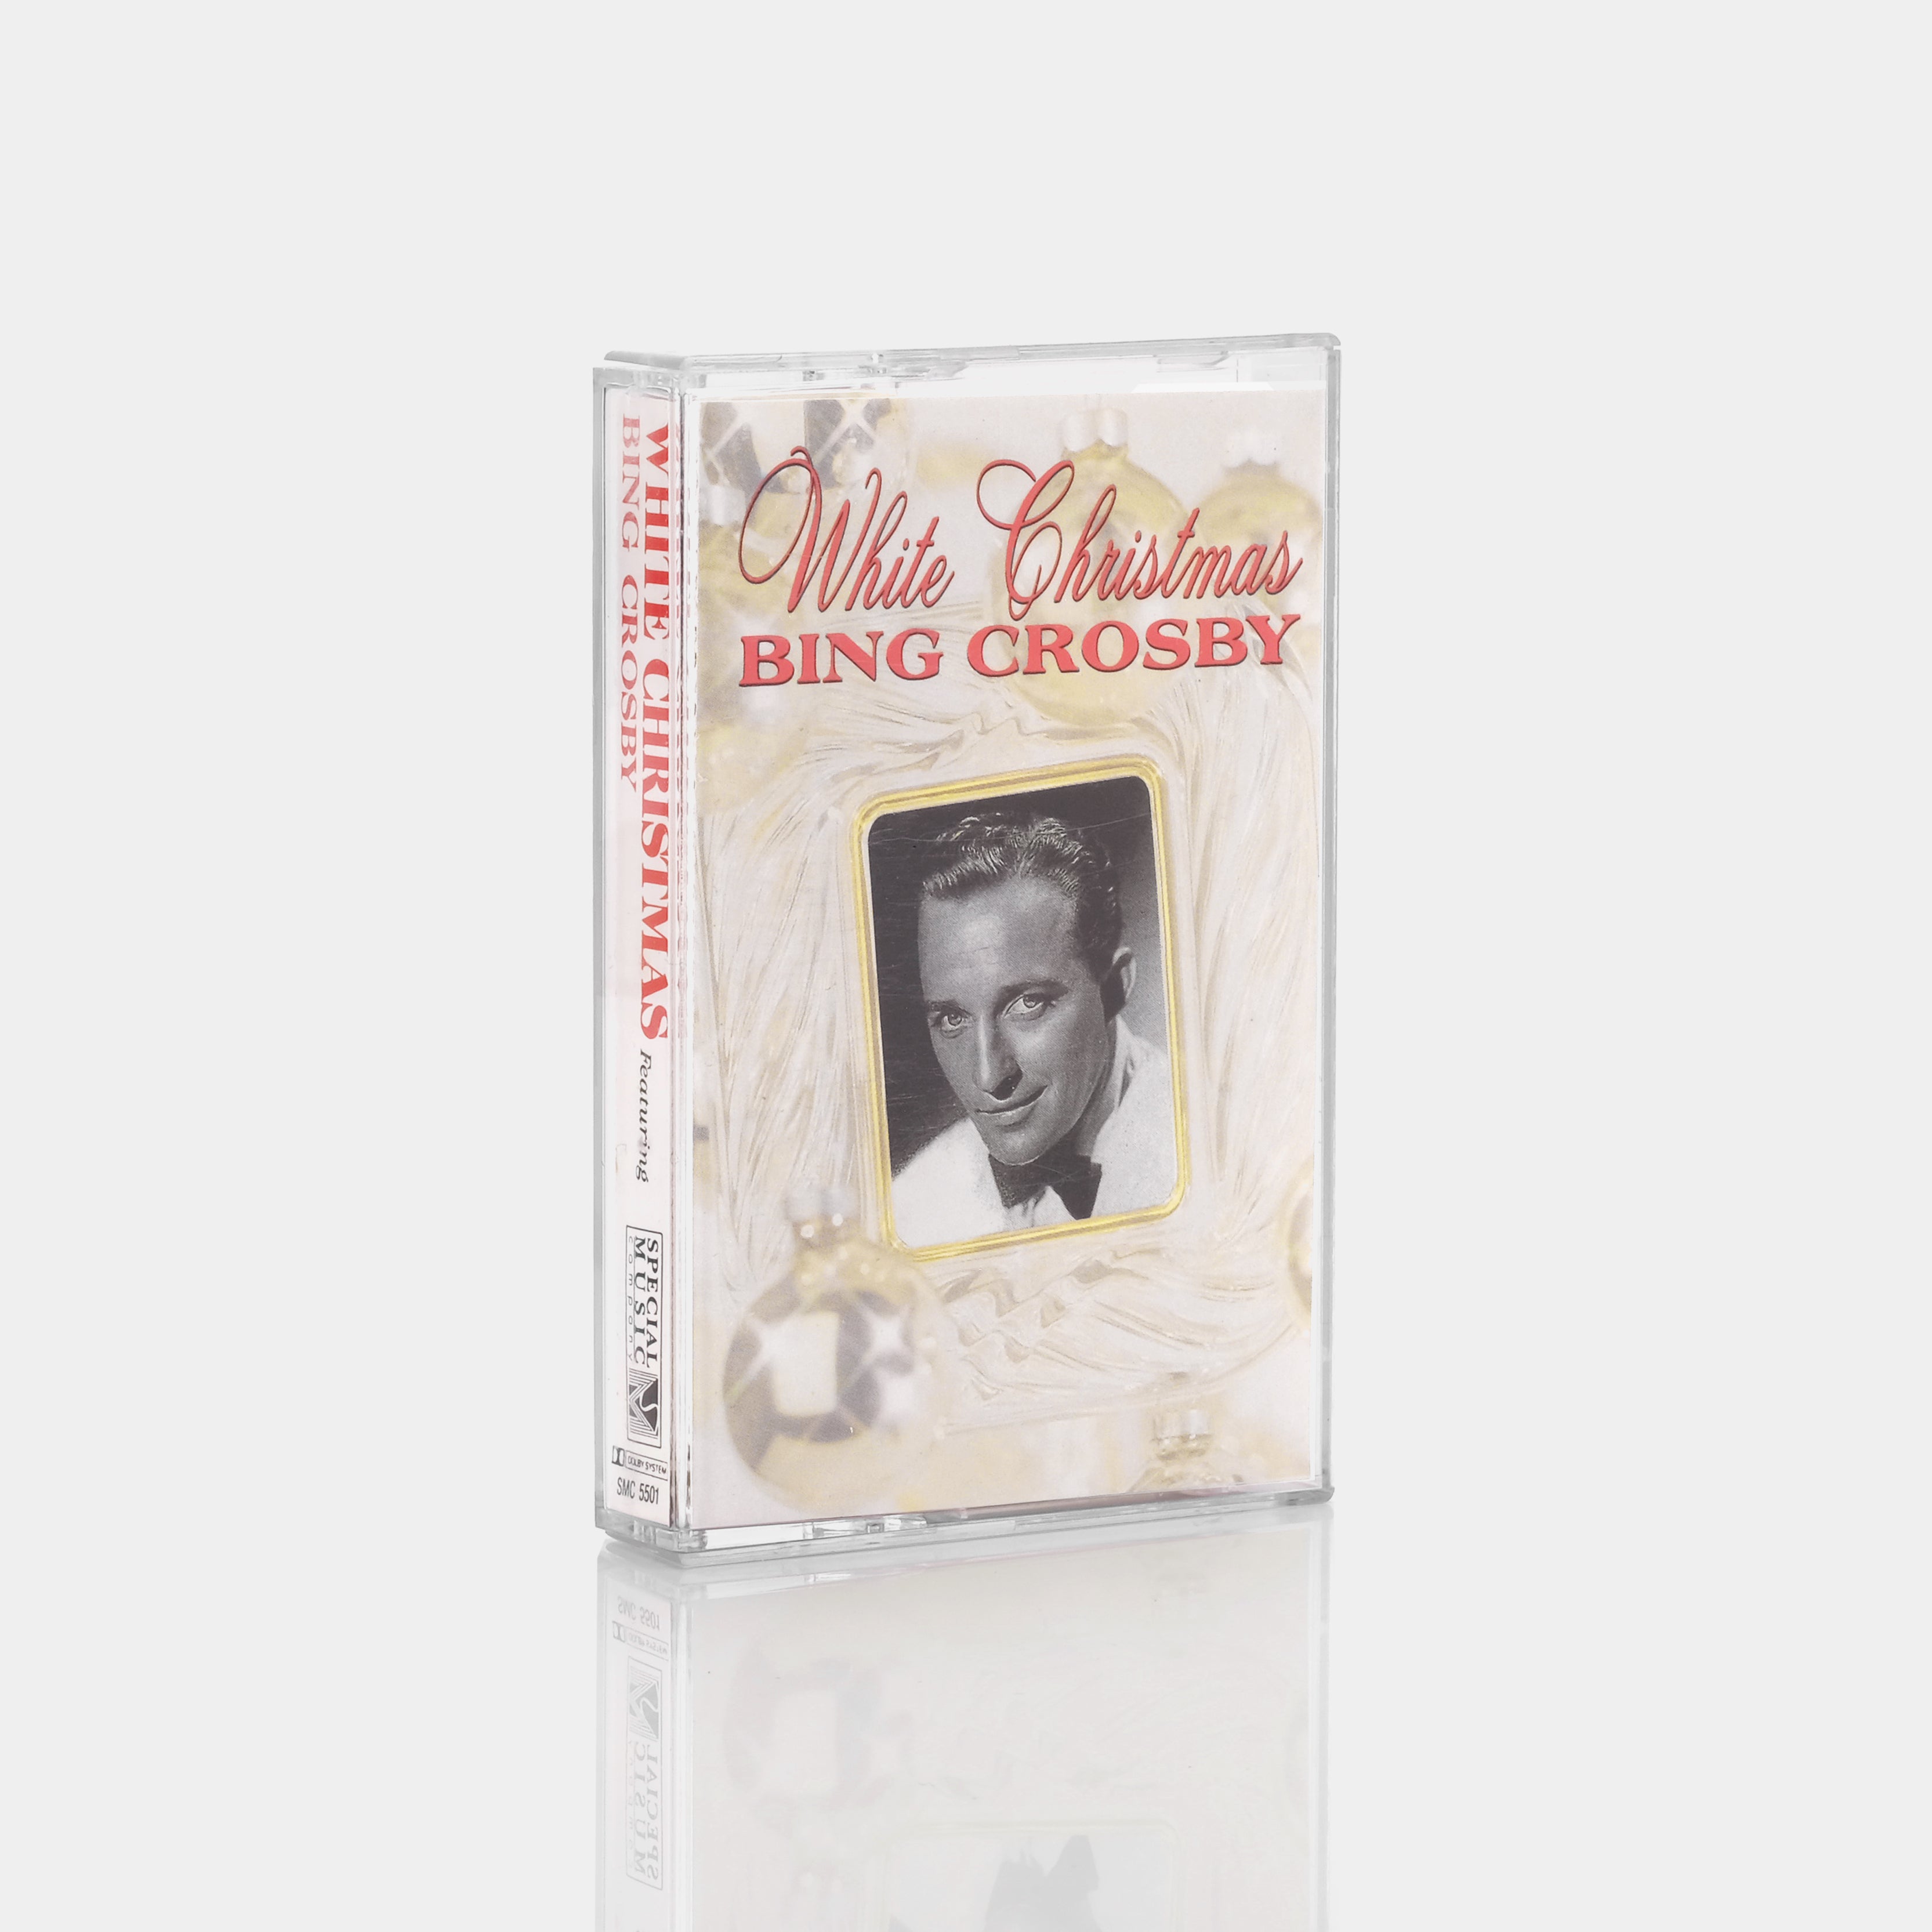 White Christmas Featuring Bing Crosby Cassette Tape